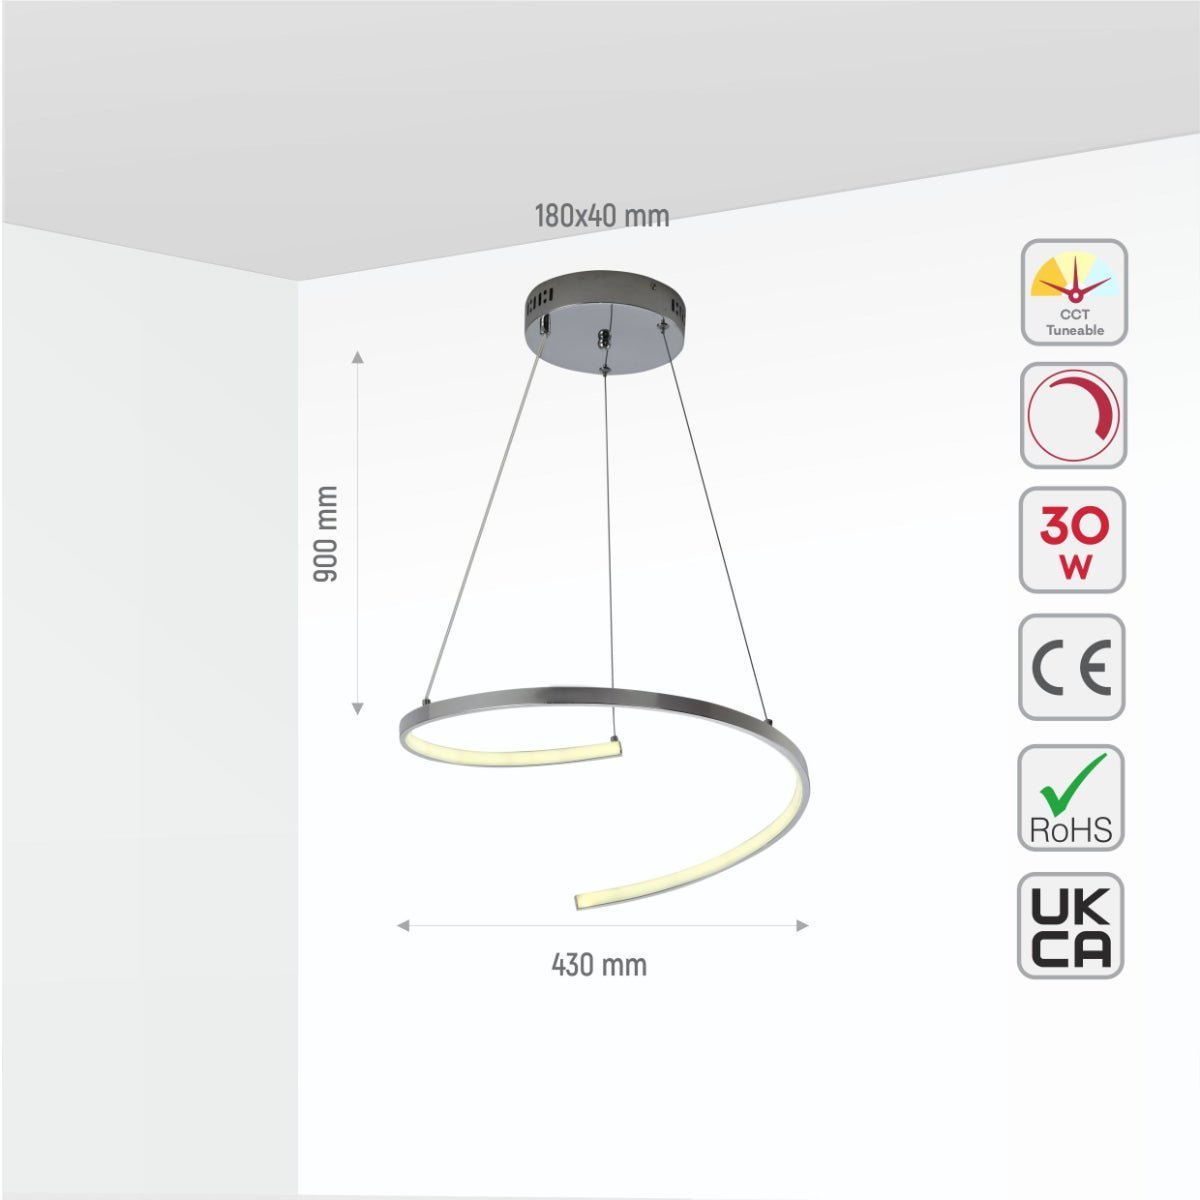 Size and specs of LED Spiral Chrome Finishing 30W CCT Change Dimmable Contemporary Nordic Scandinavian Pendant Ceiling Light with Remote Control | TEKLED 154-17270